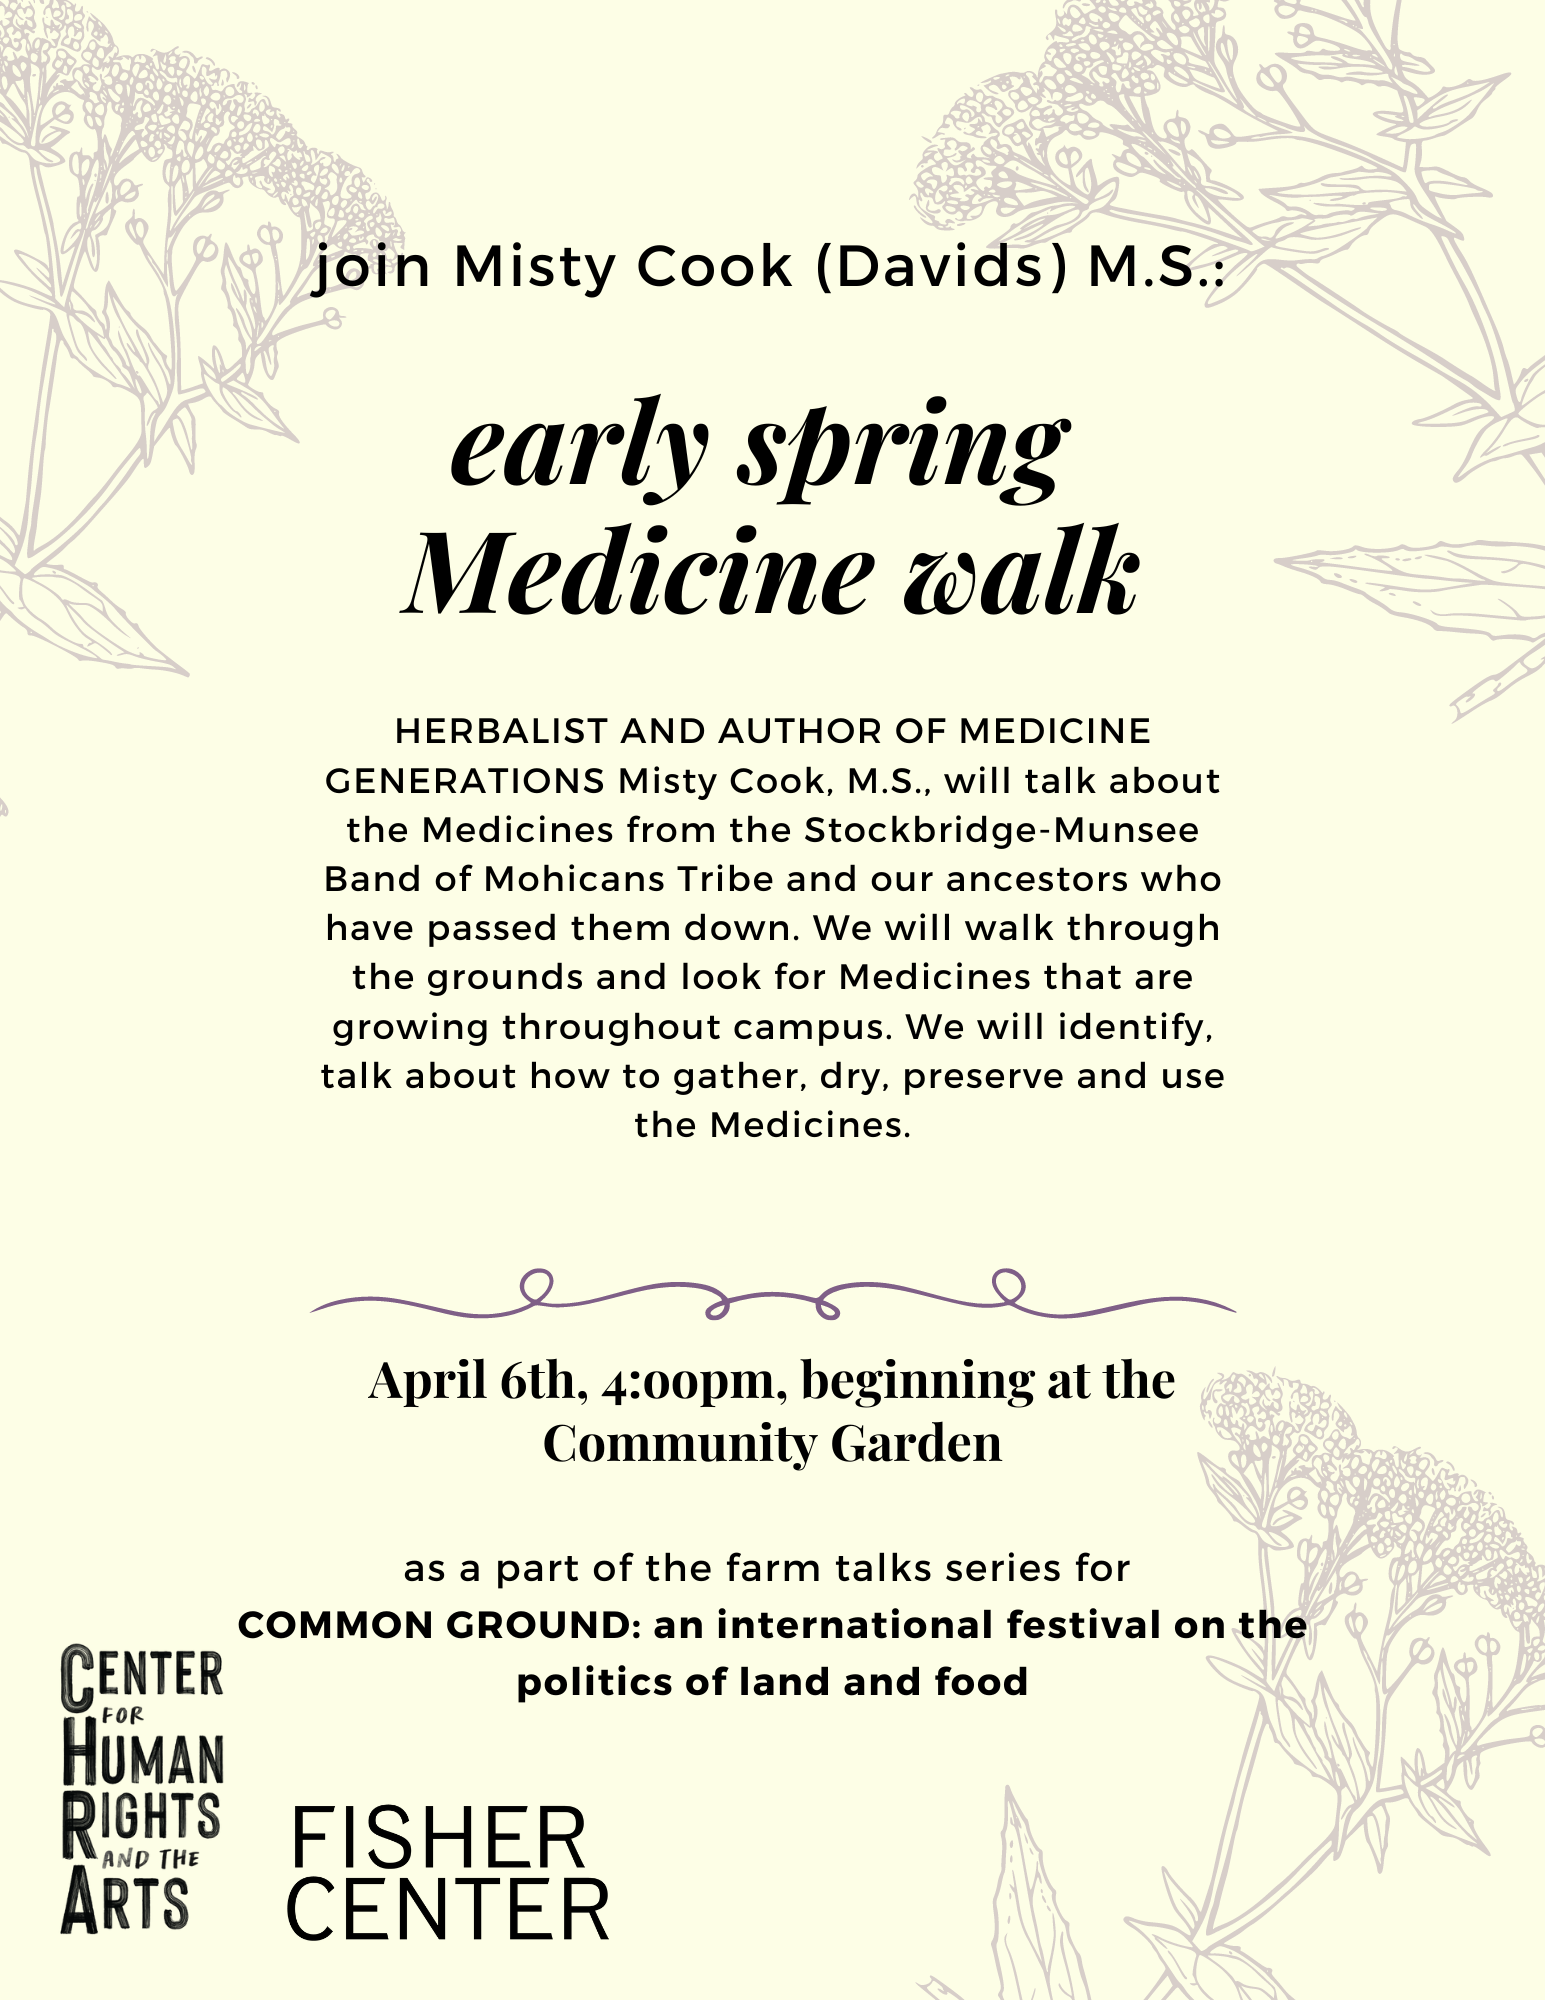 Early Spring Traditional Medicines Walk with Misty Cook (Davids), M.S.